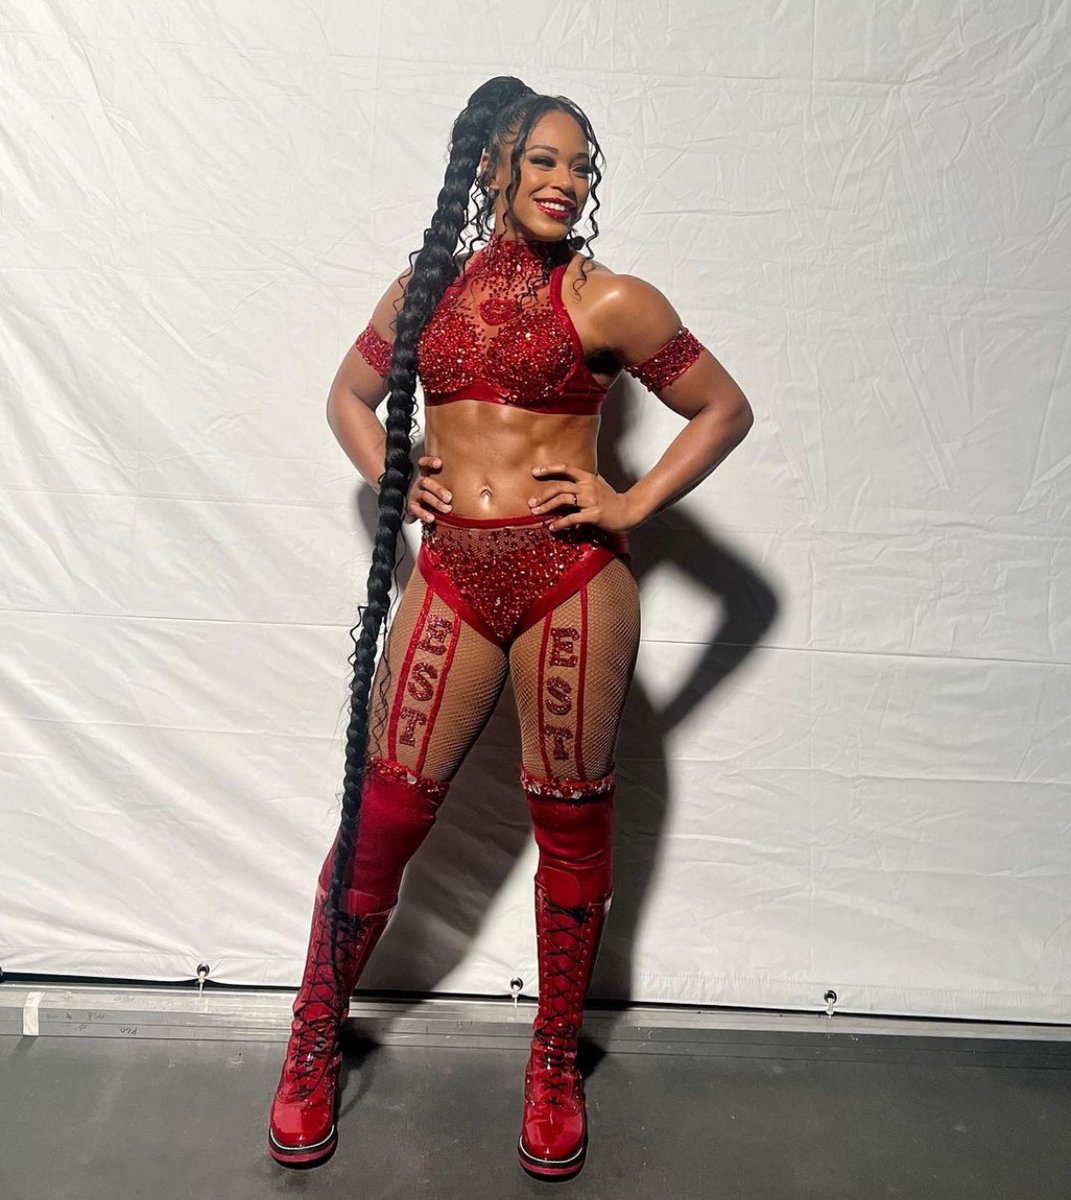 True or False?

Bianca Belair will improve to 4-0 at Wrestlemania this year